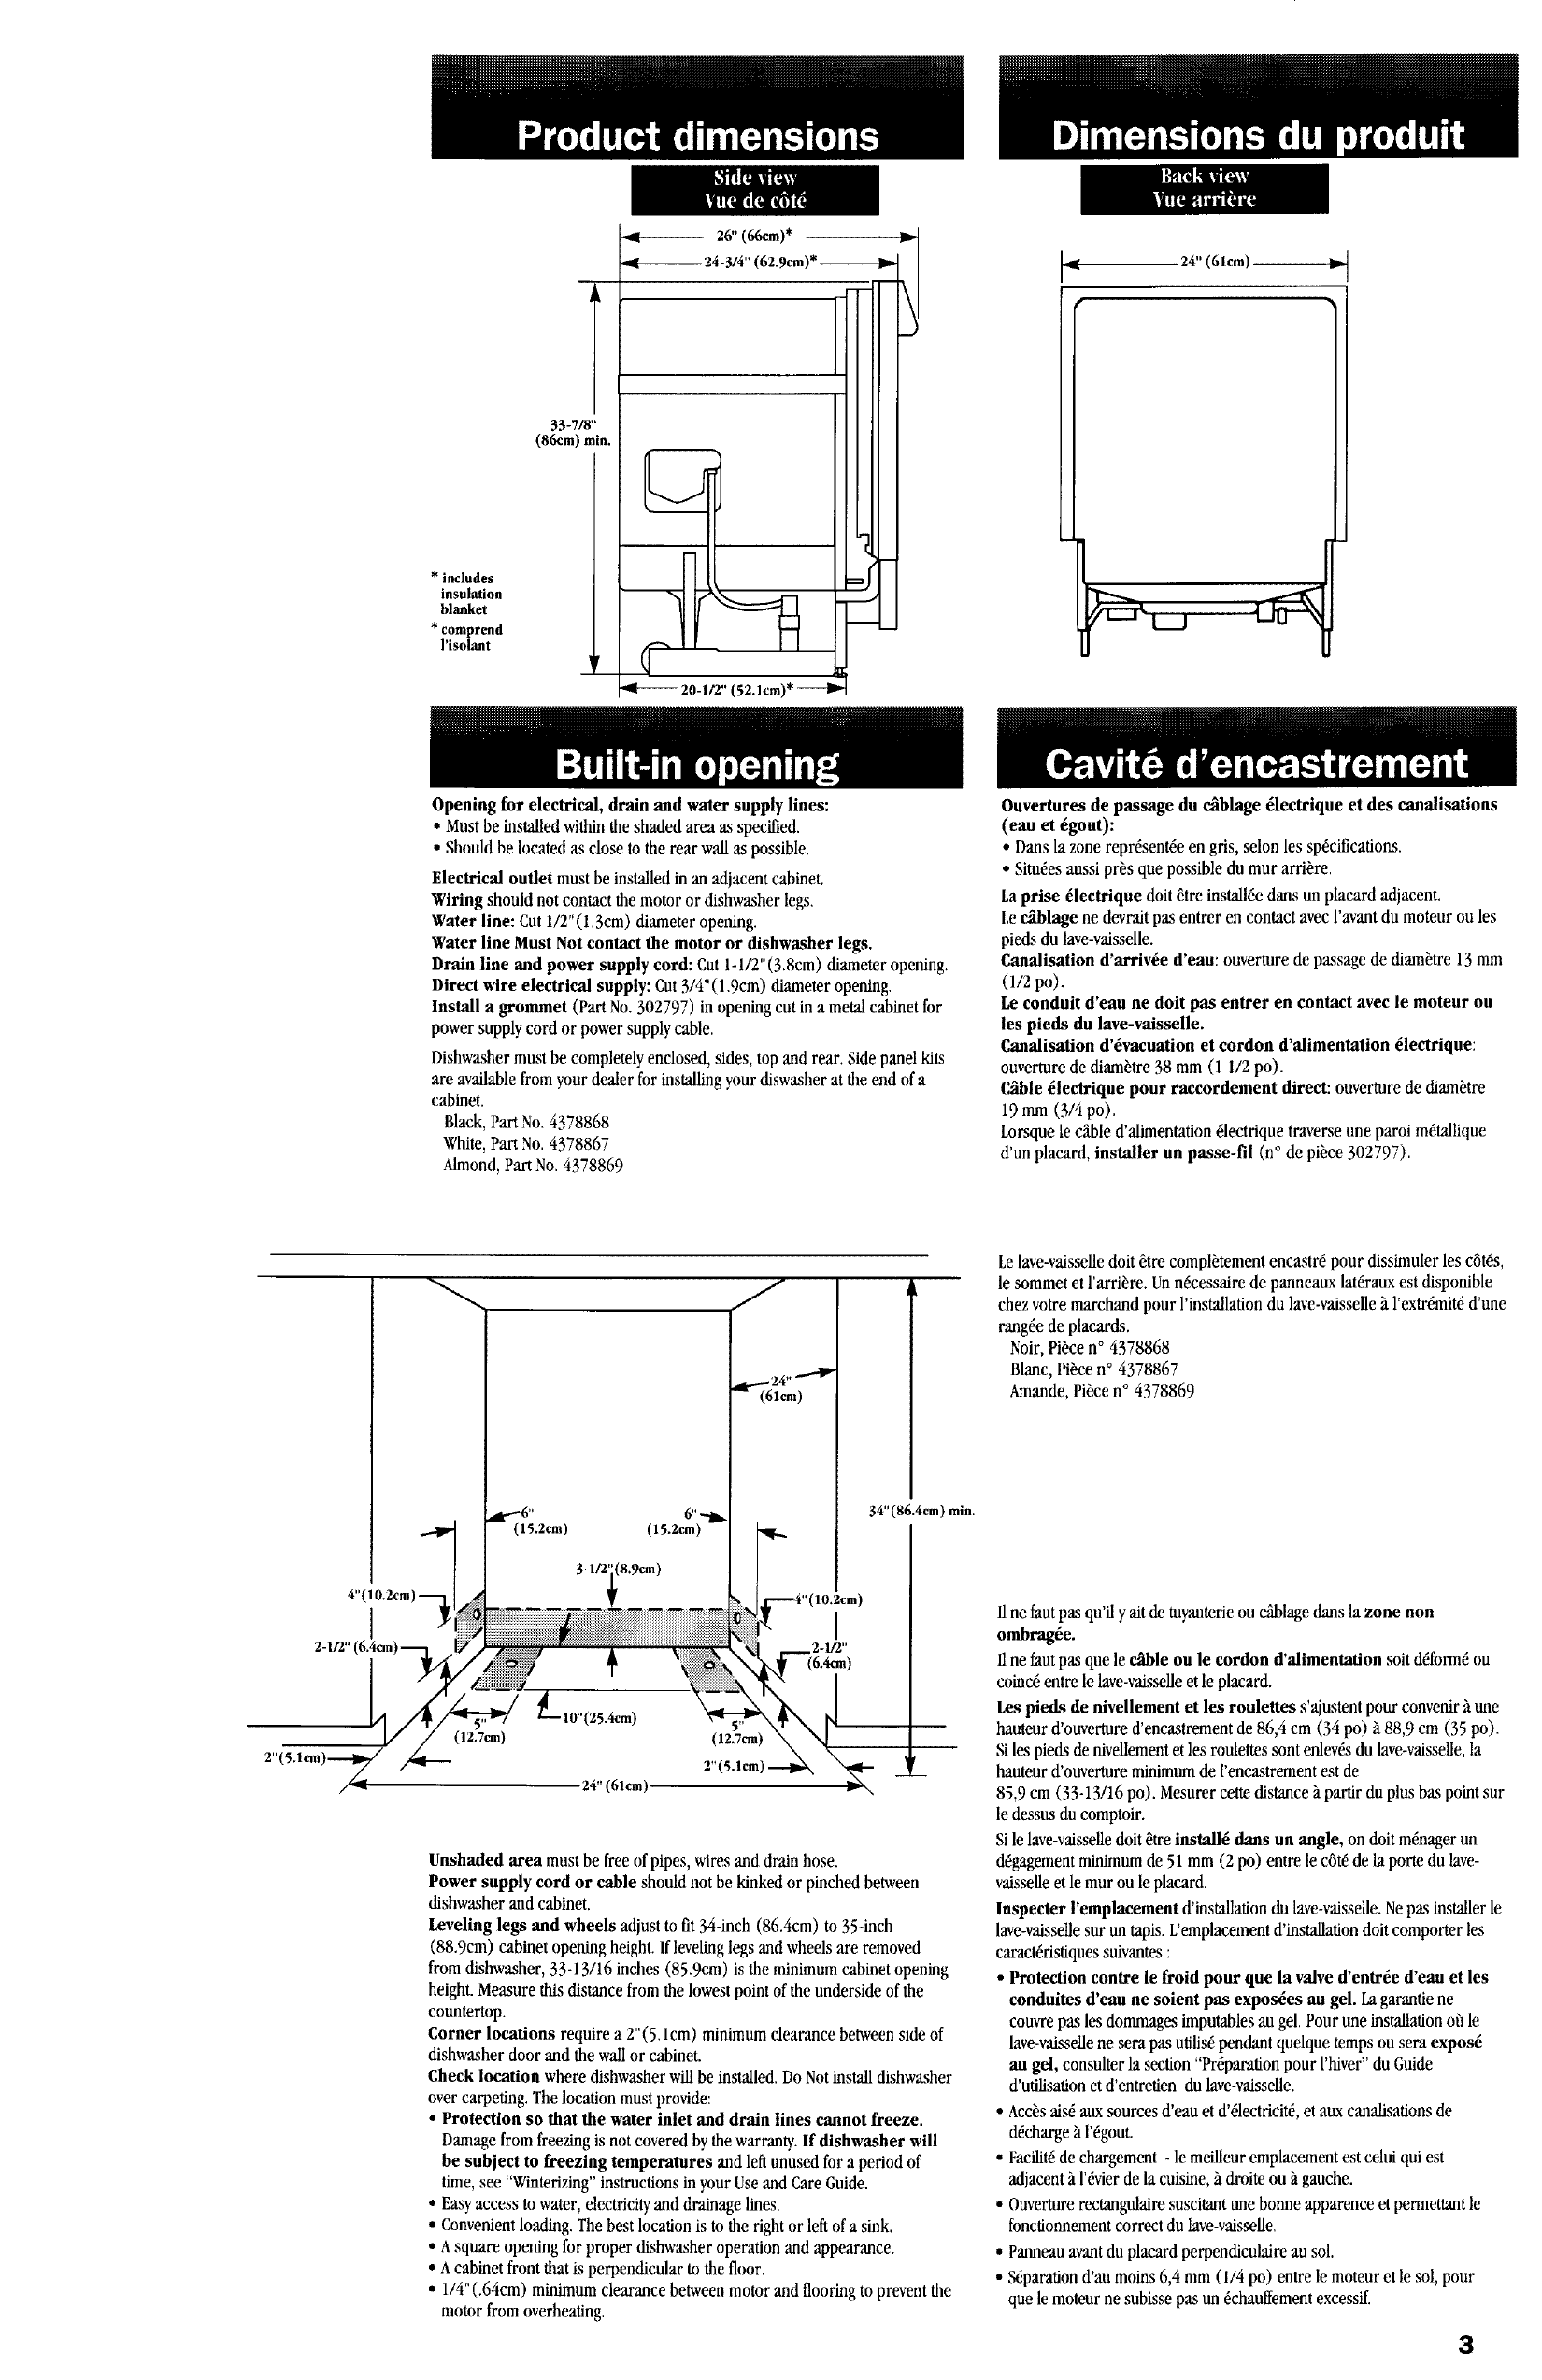 Page 3 of 11 - Kitchenaid KUDS24SEAL2 User Manual  UNDERCOUNTER DISHWASHER - Manuals And Guides L0711326